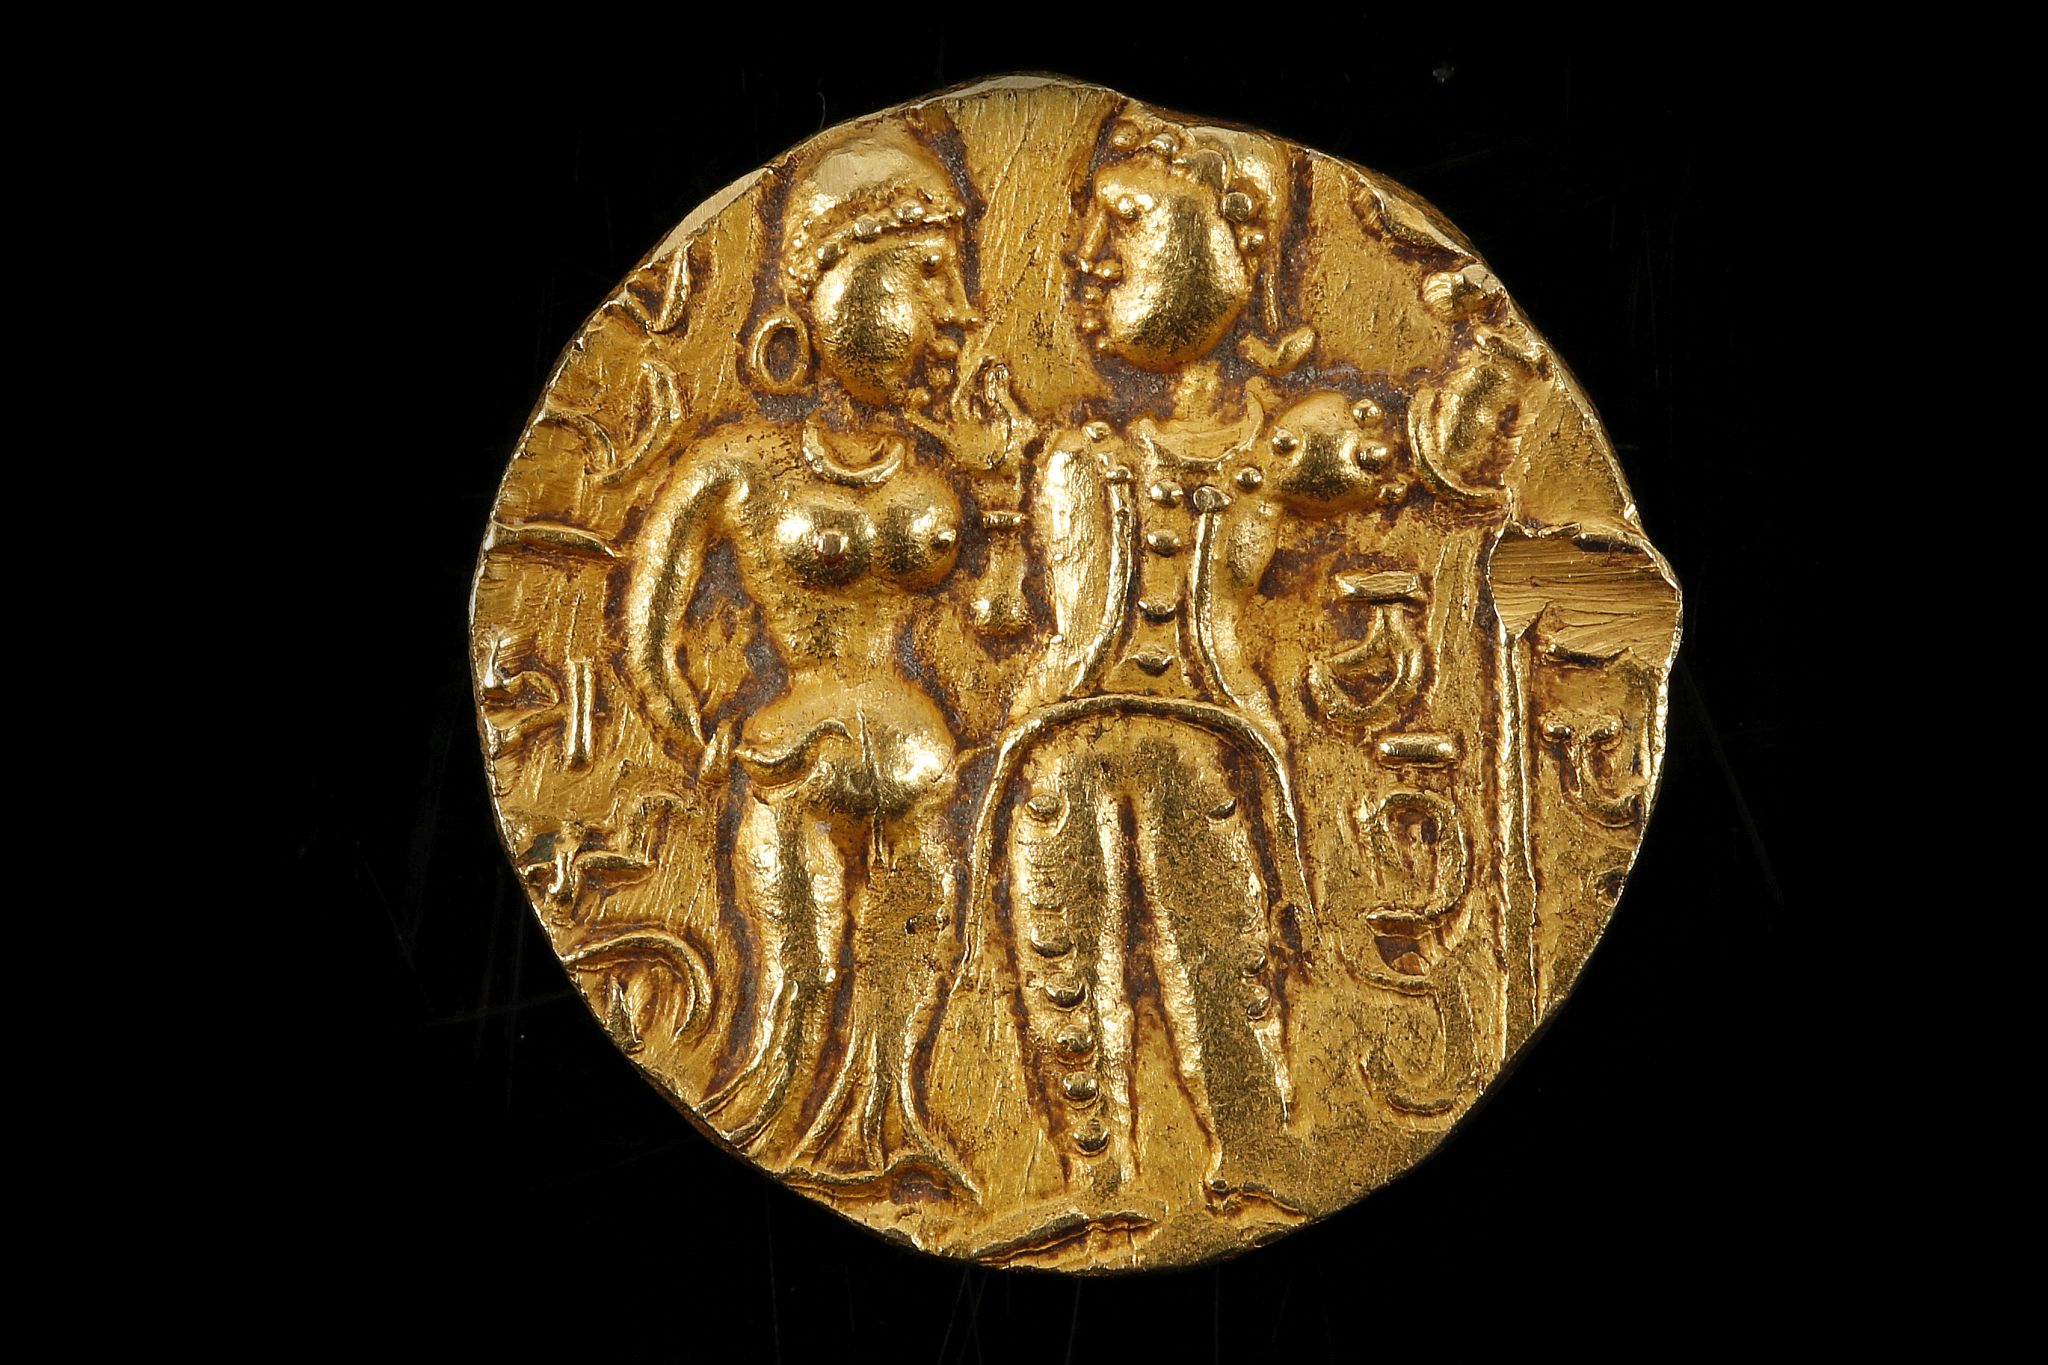 Samudragupta gold dinar, king and queen type c.335-375, king standing right, queen left facing, king